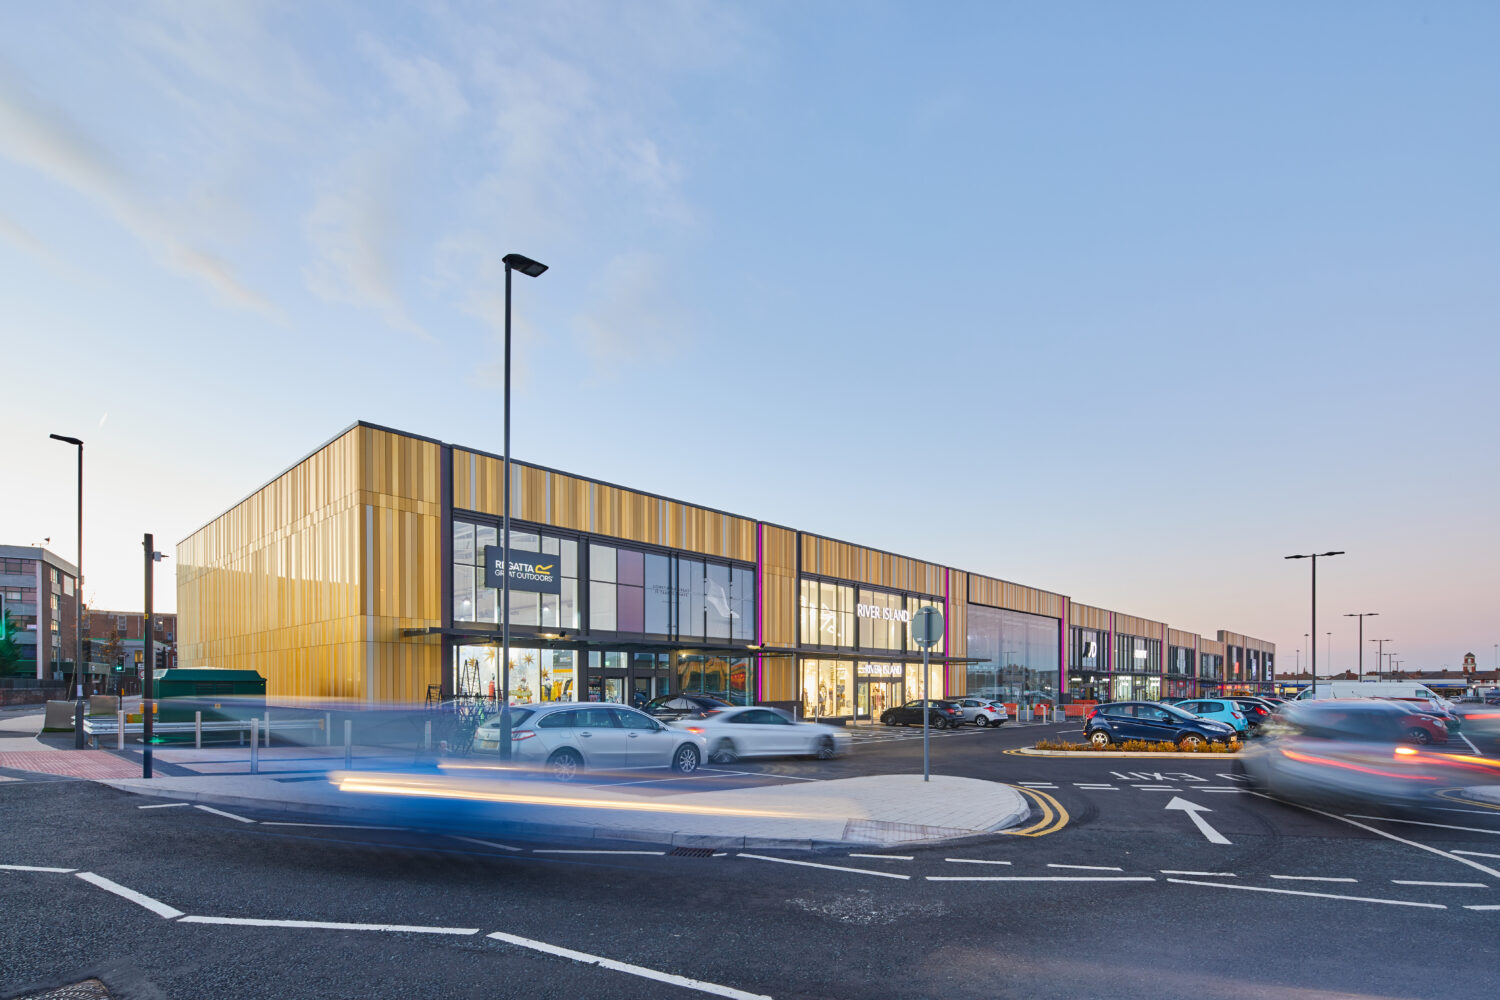 Liverpool Shopping Park - multi-phase development on one the the UK's largest shopping parks.